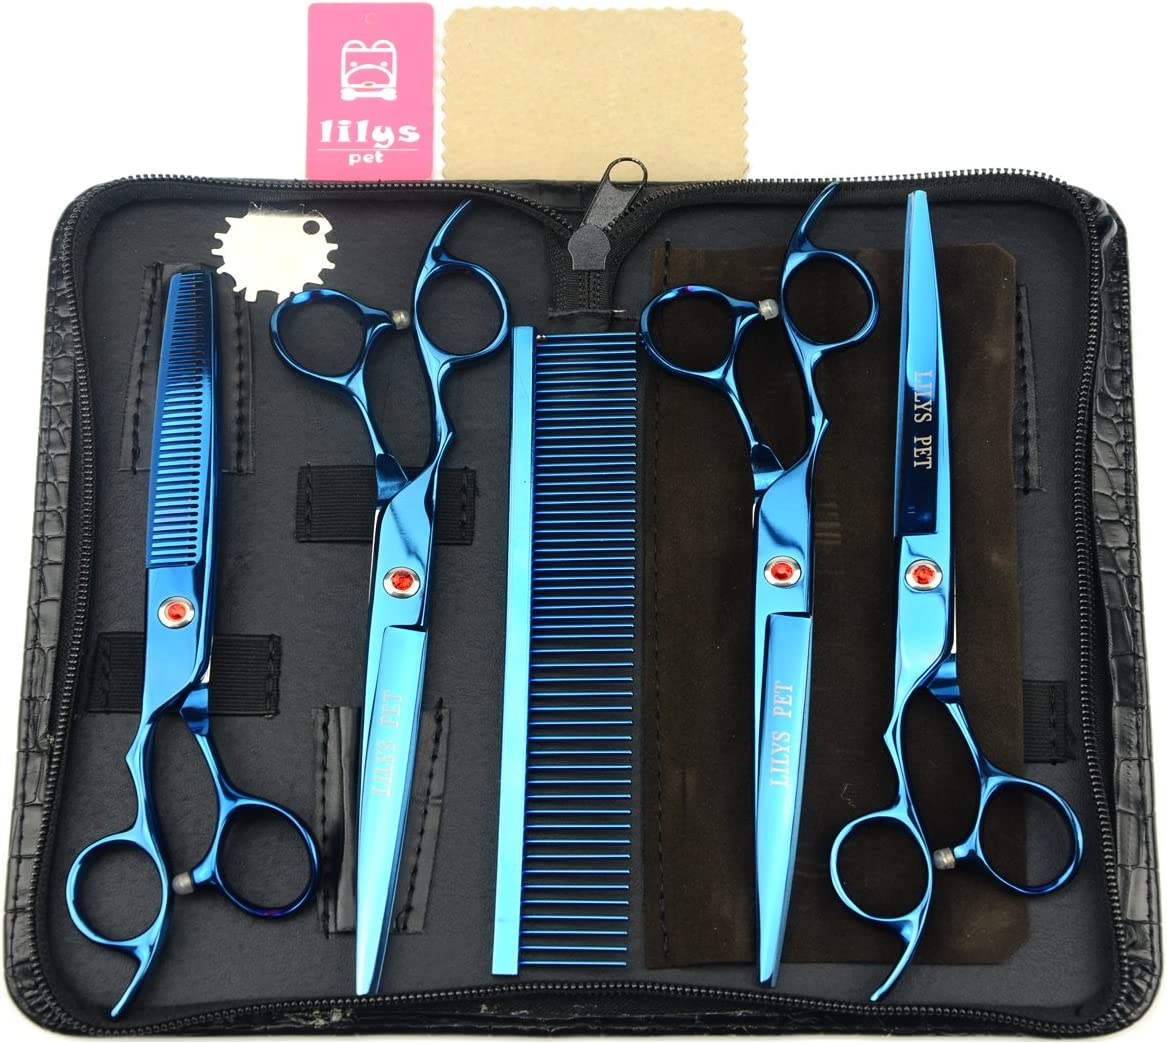 7.5" High-End Left-Handed Professional PET DOG Grooming Scissors Suit Cutting&Curved&Thinning Shears (Blue)